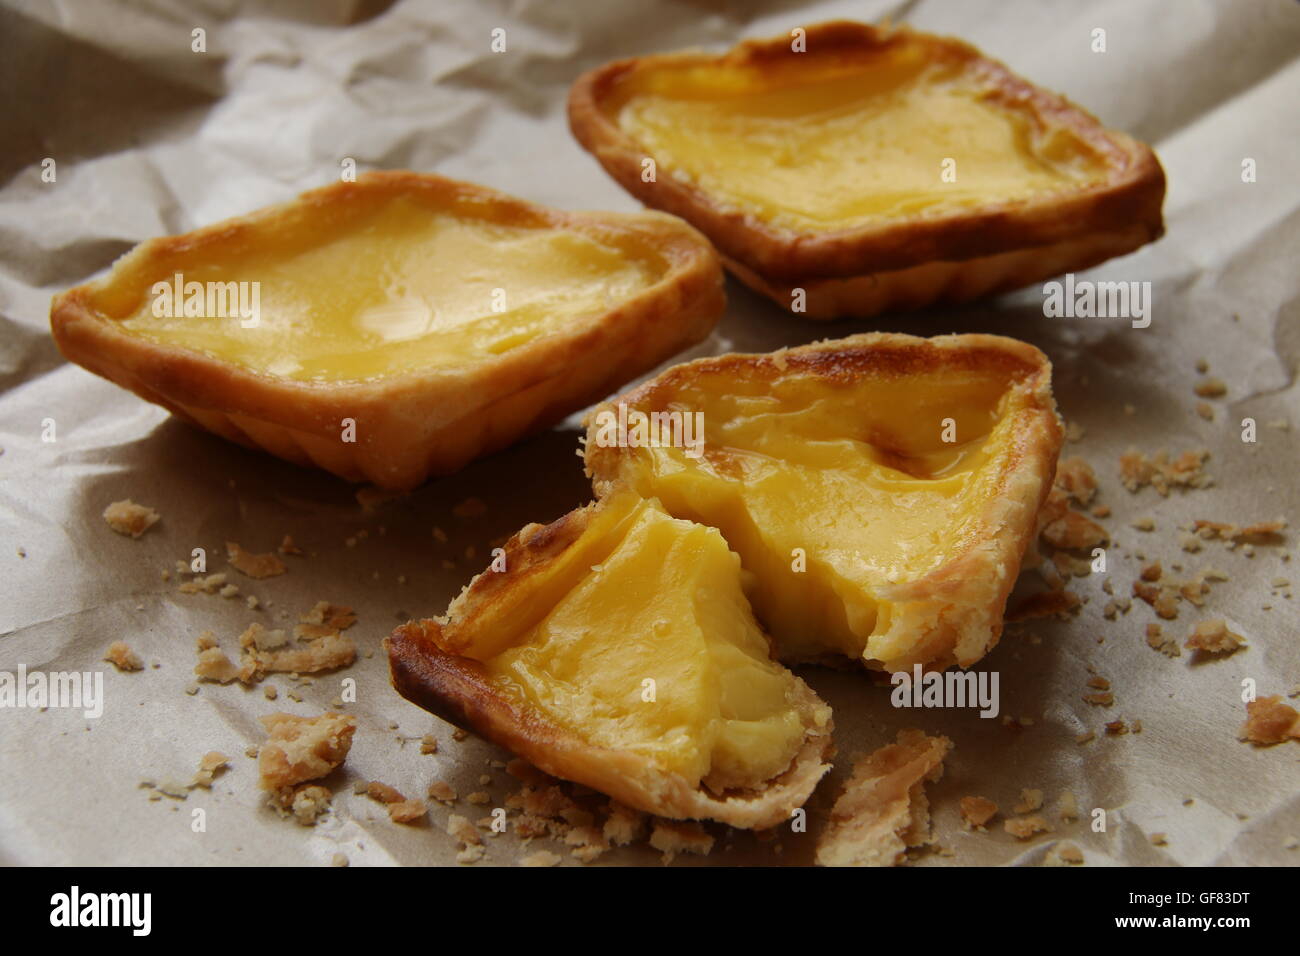 Egg tarts arranged on crumpled food wrapping paper. The crumbs are scattered around the tarts. Stock Photo